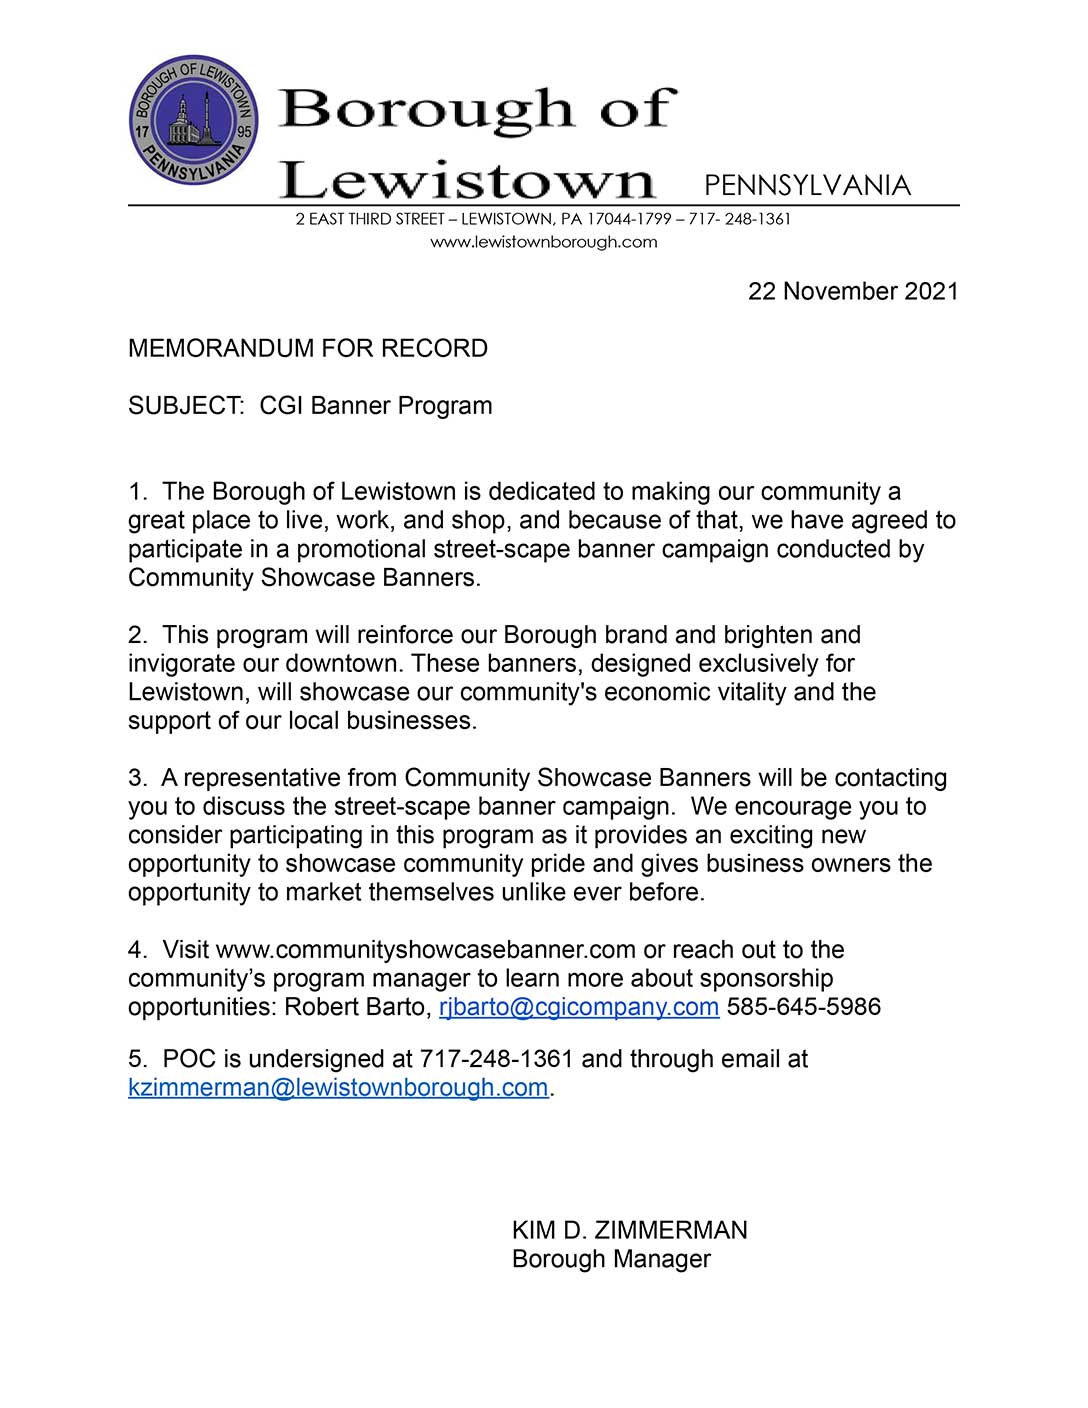 Invitation from Lewistown, PA